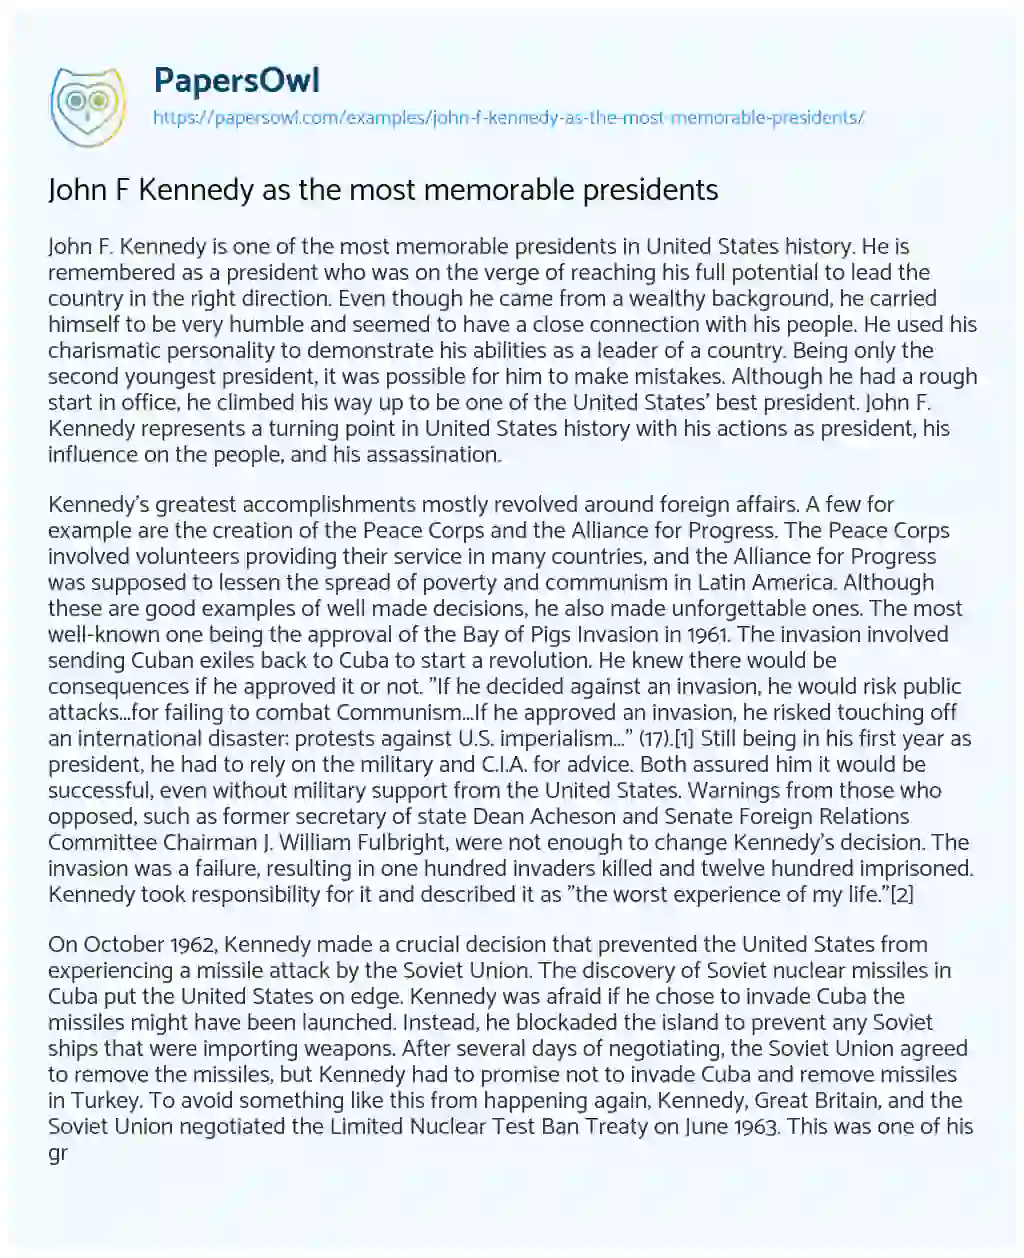 Essay on John F Kennedy as the most Memorable Presidents